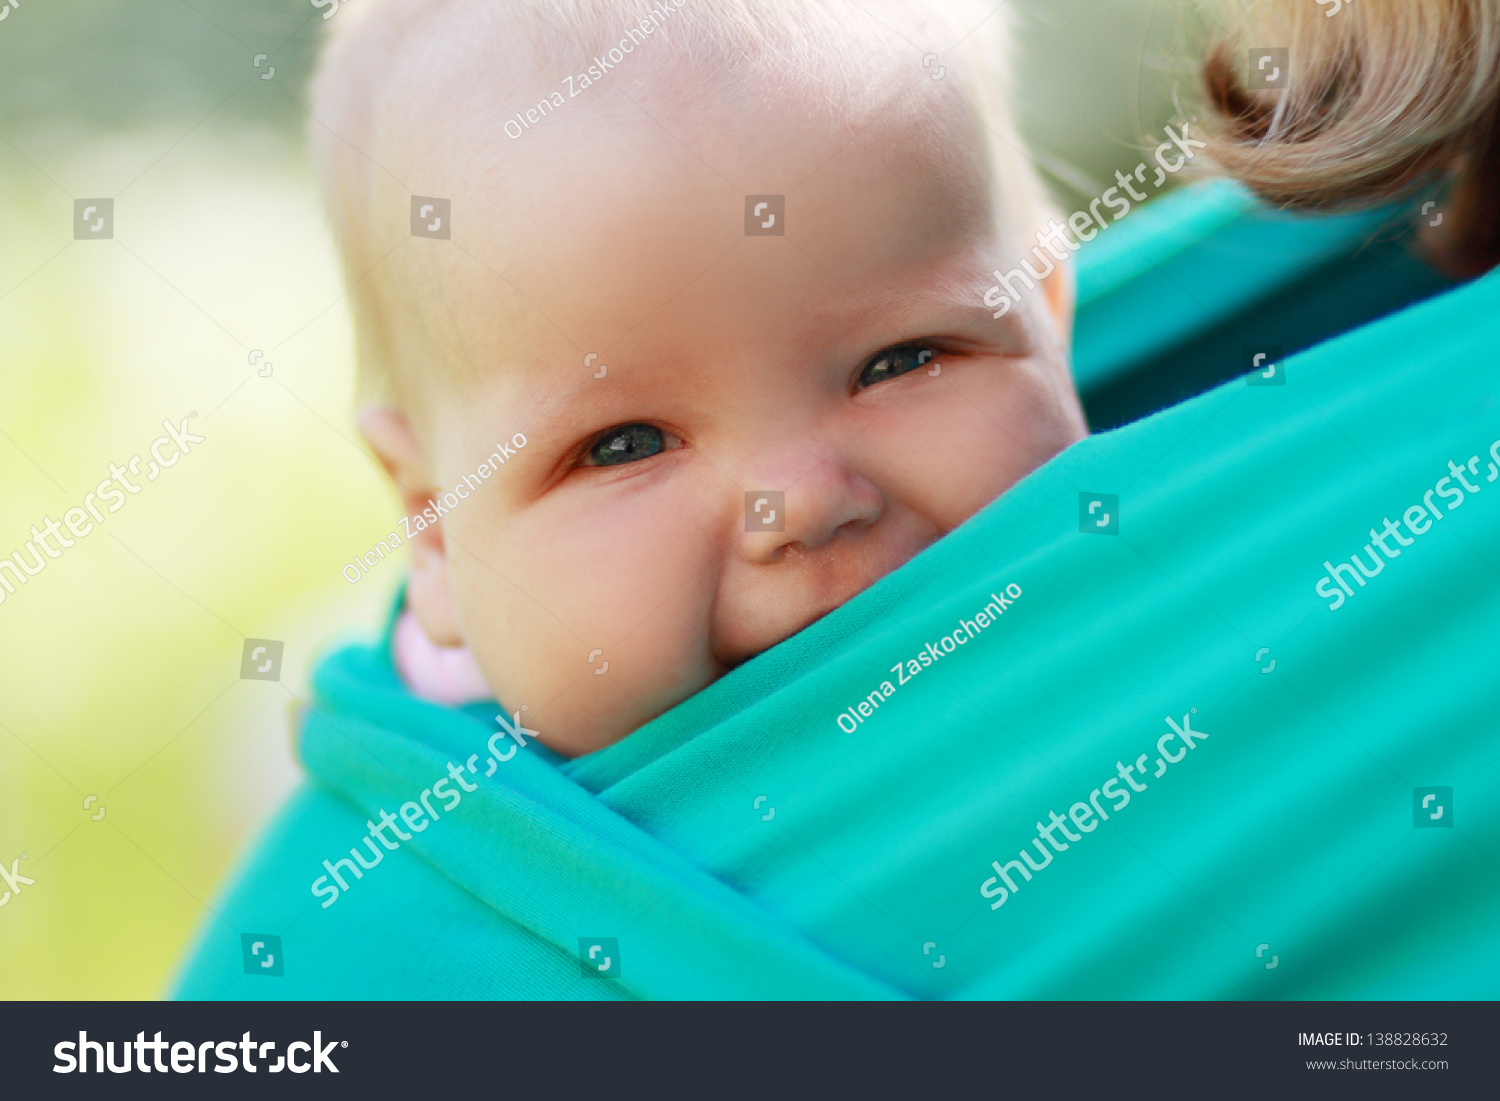 Smiling baby closed to mom in sling outdoor #138828632